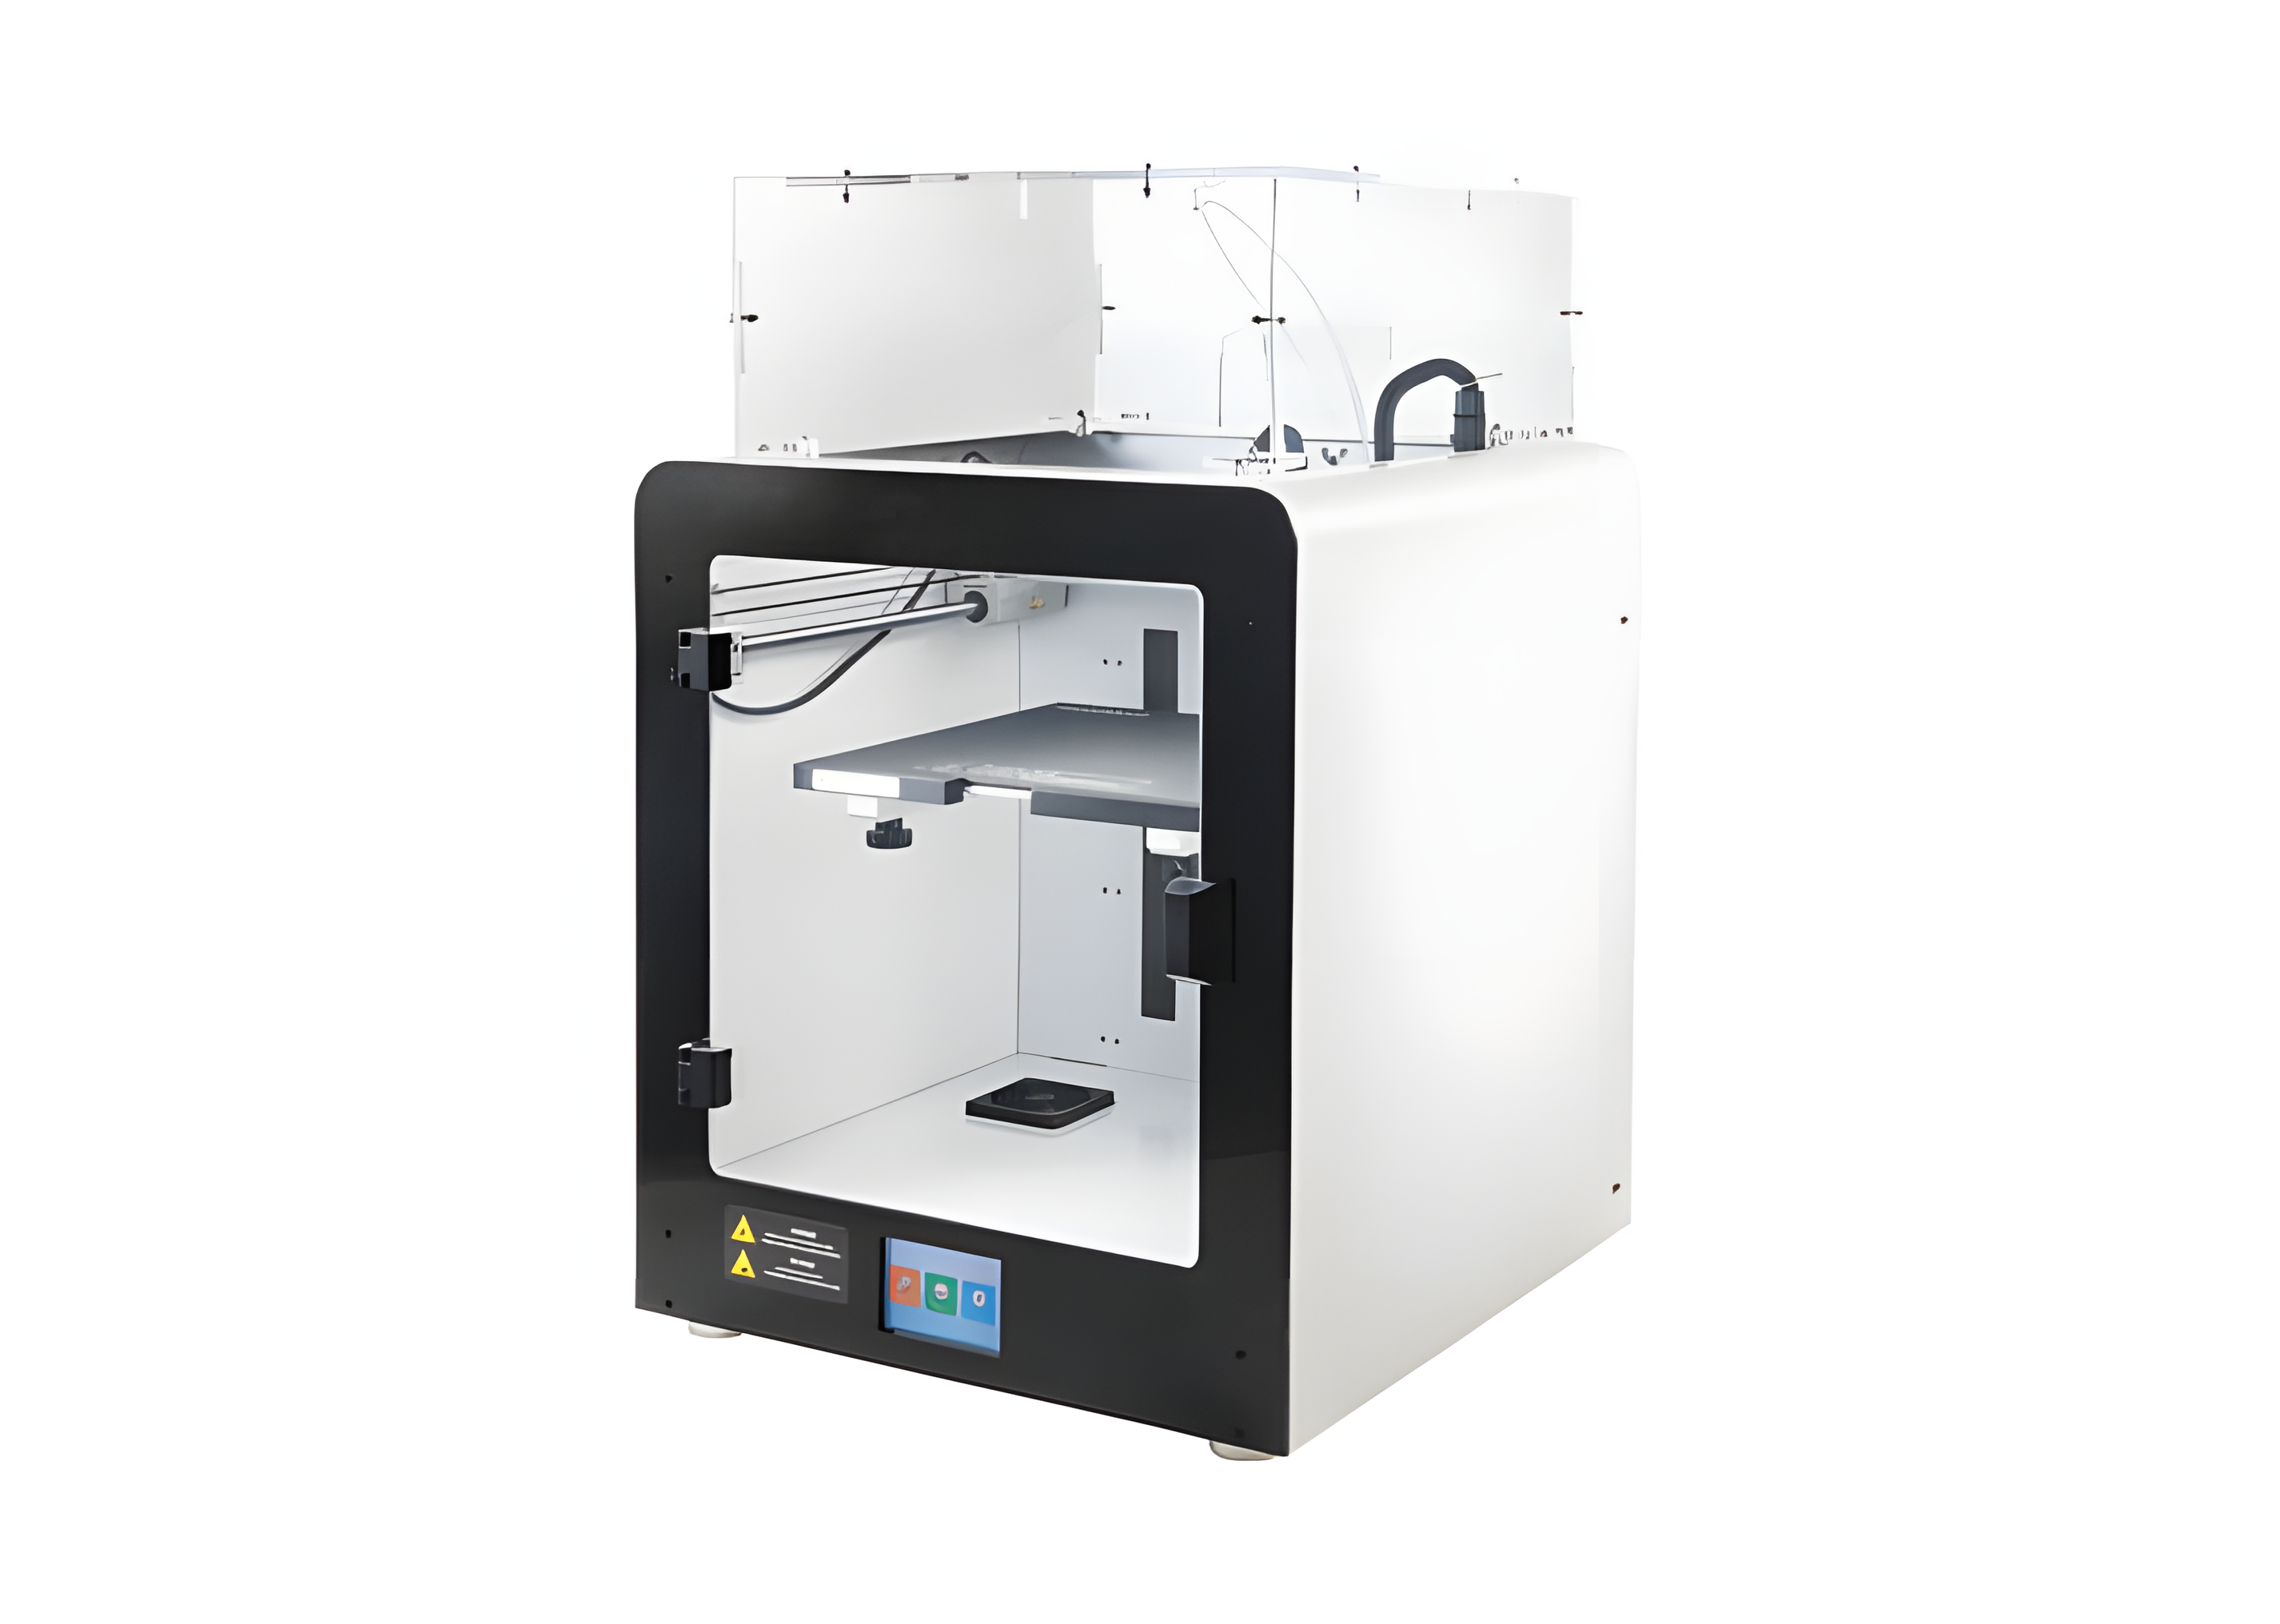 Goofoo MIDO Professional Multifunctional Industrial 3d Printer printing size 200*200*200mm